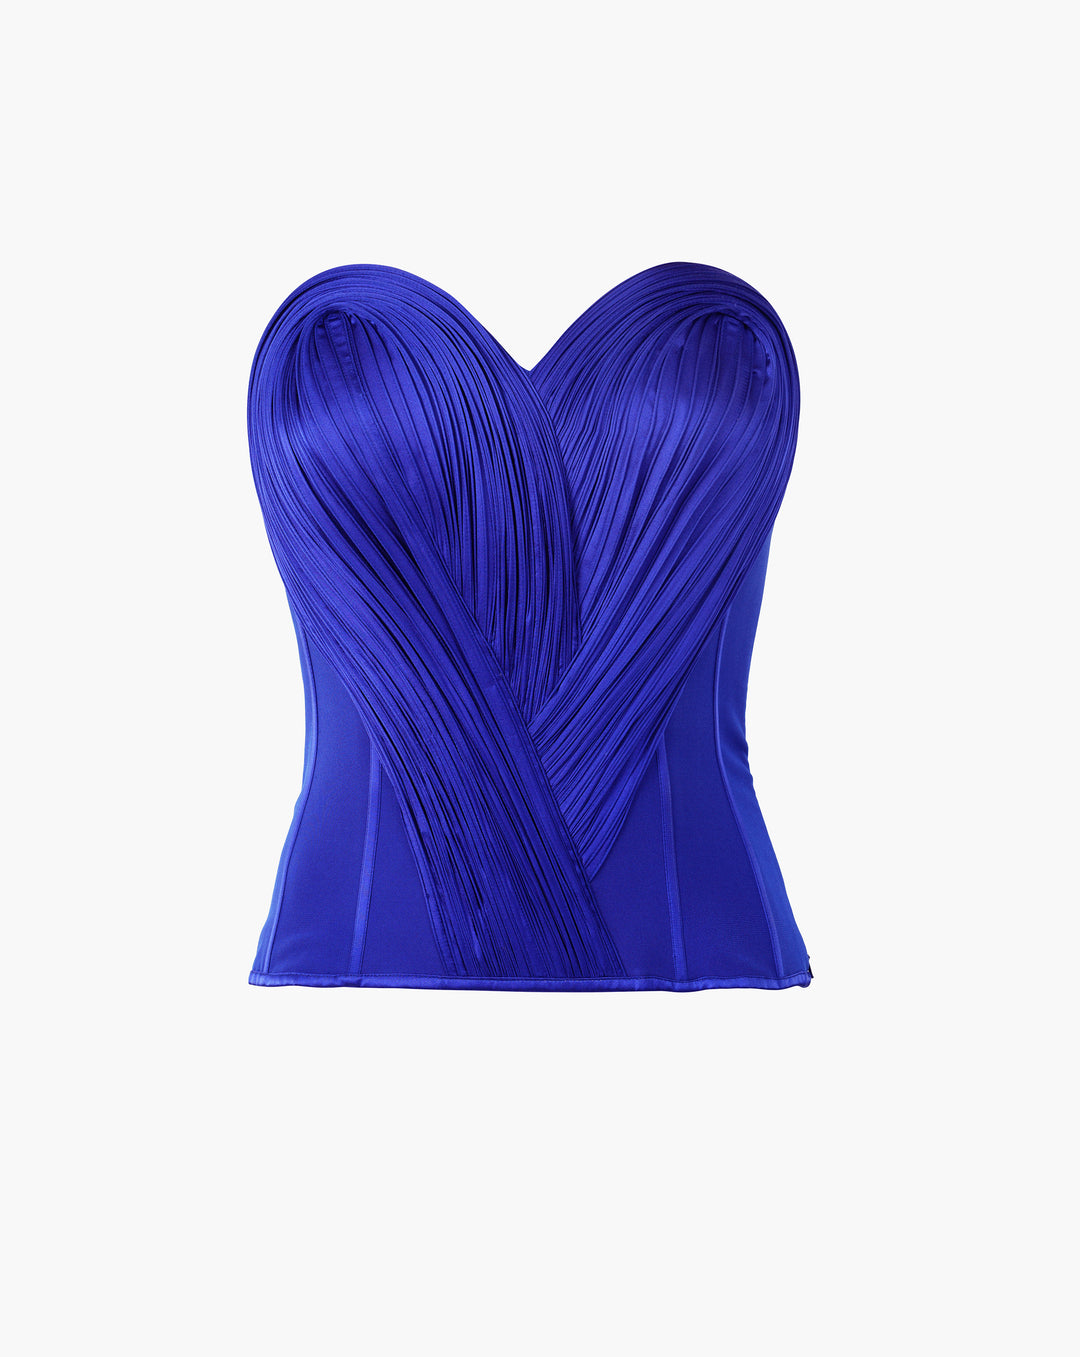 The Corseted Sculpted Top